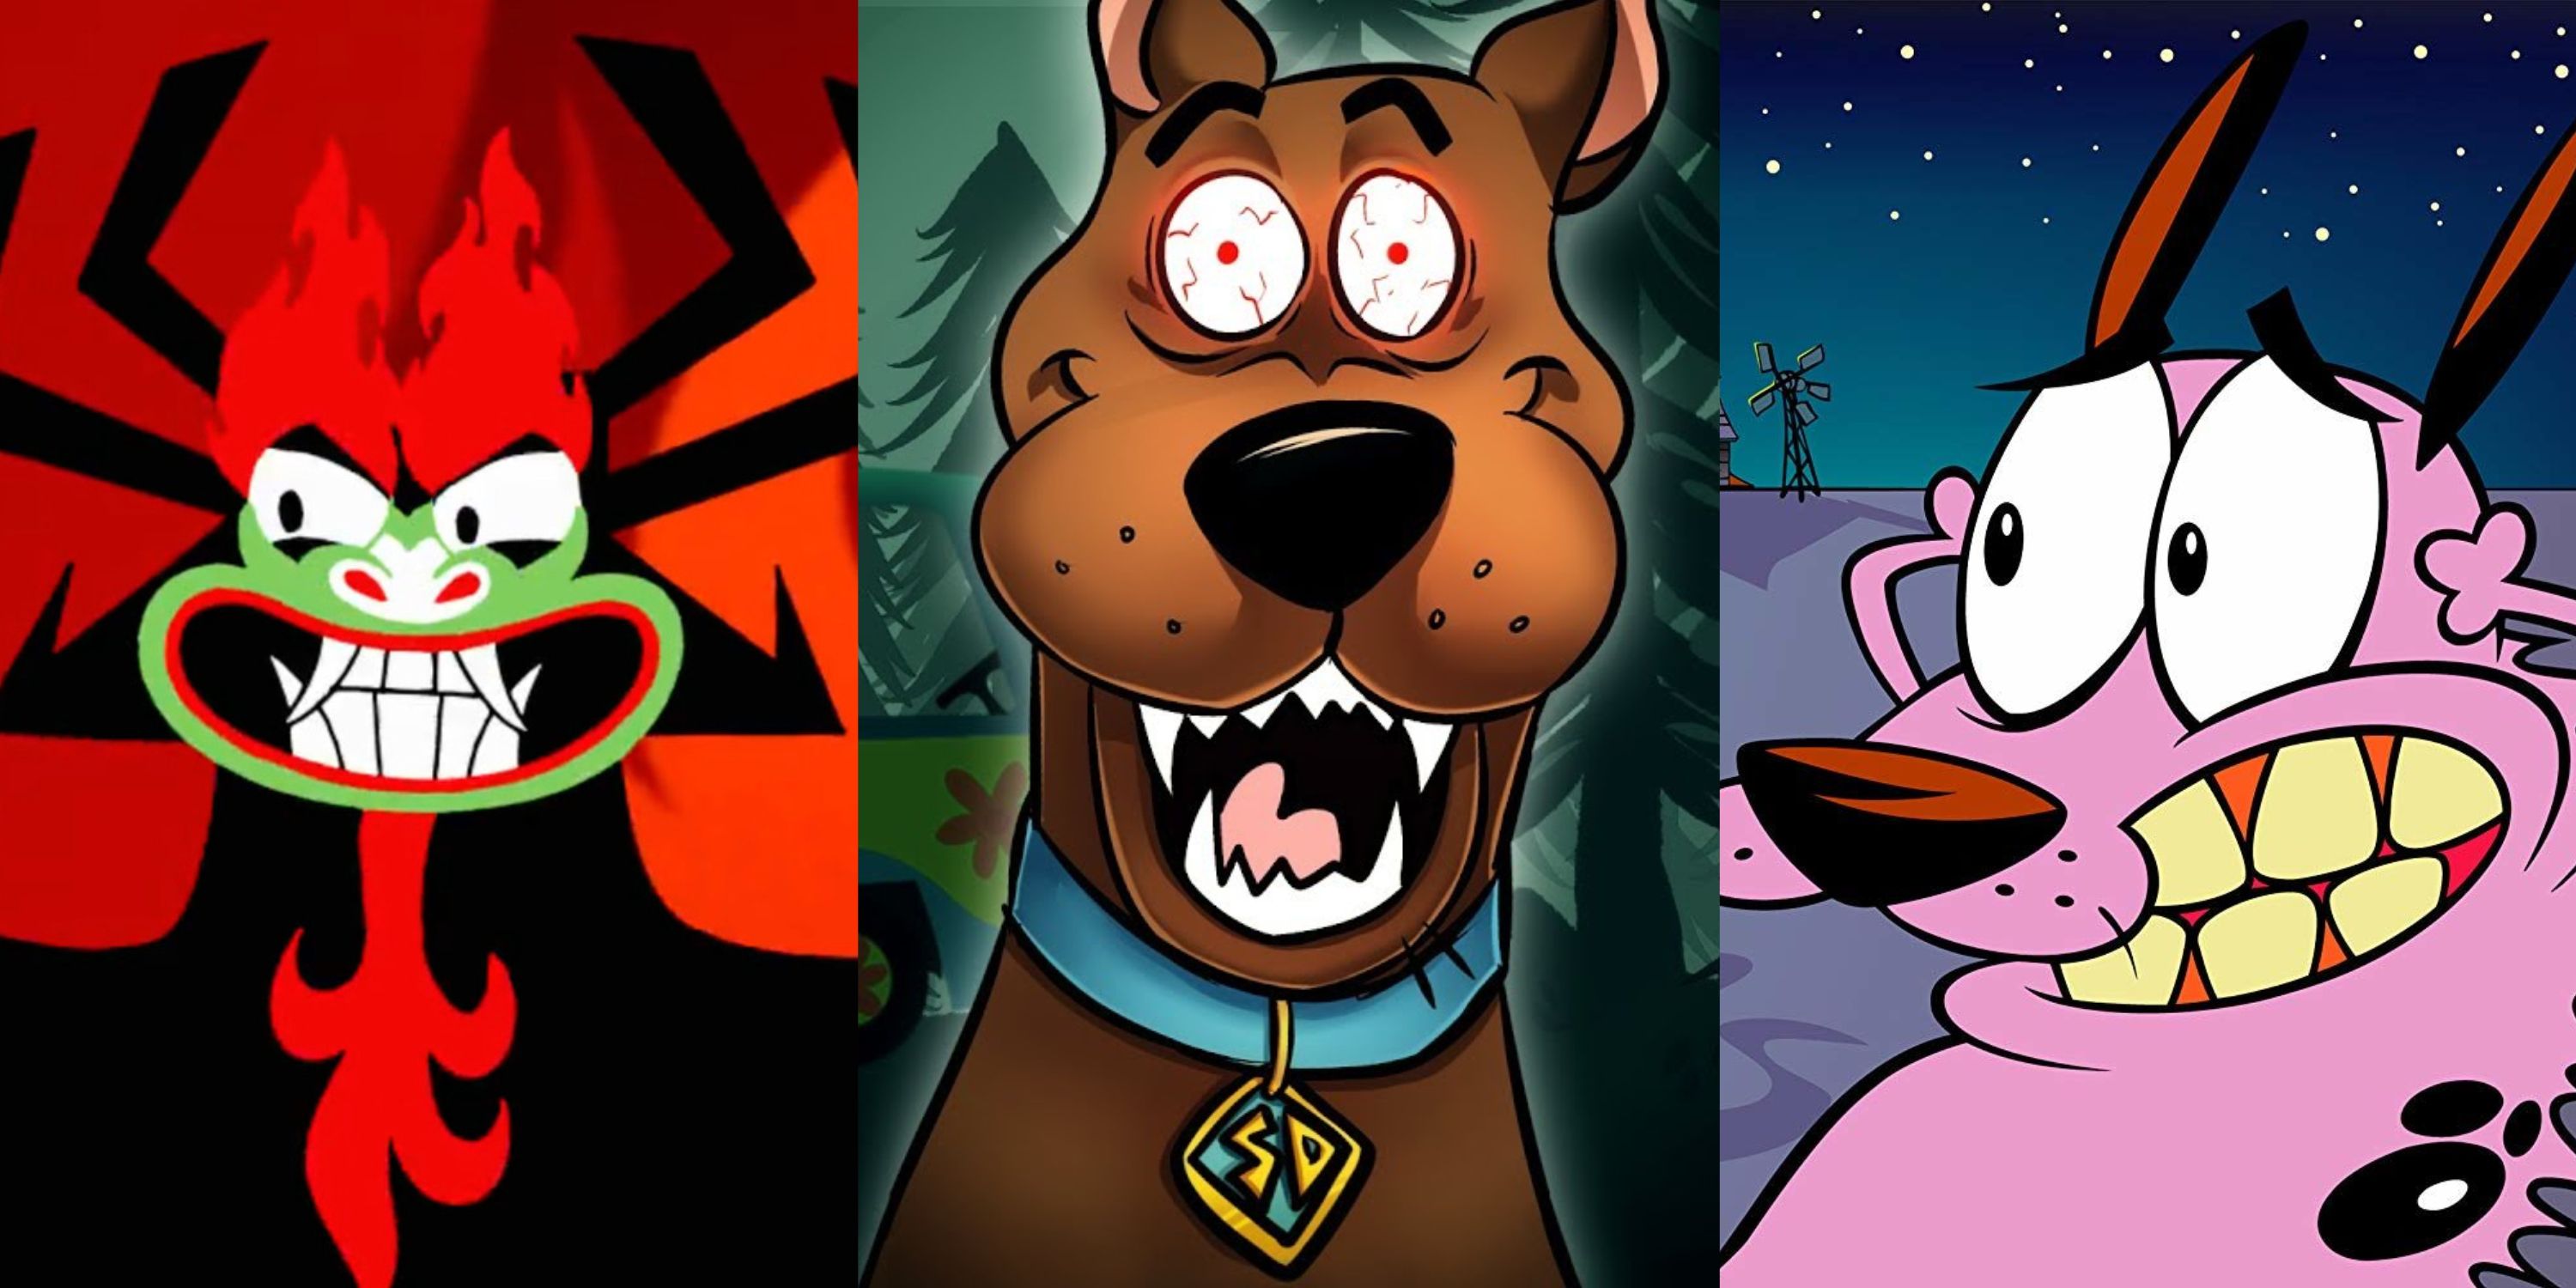 TOP 10 BEST Cartoon Network Shows,that was aired in INDIA 